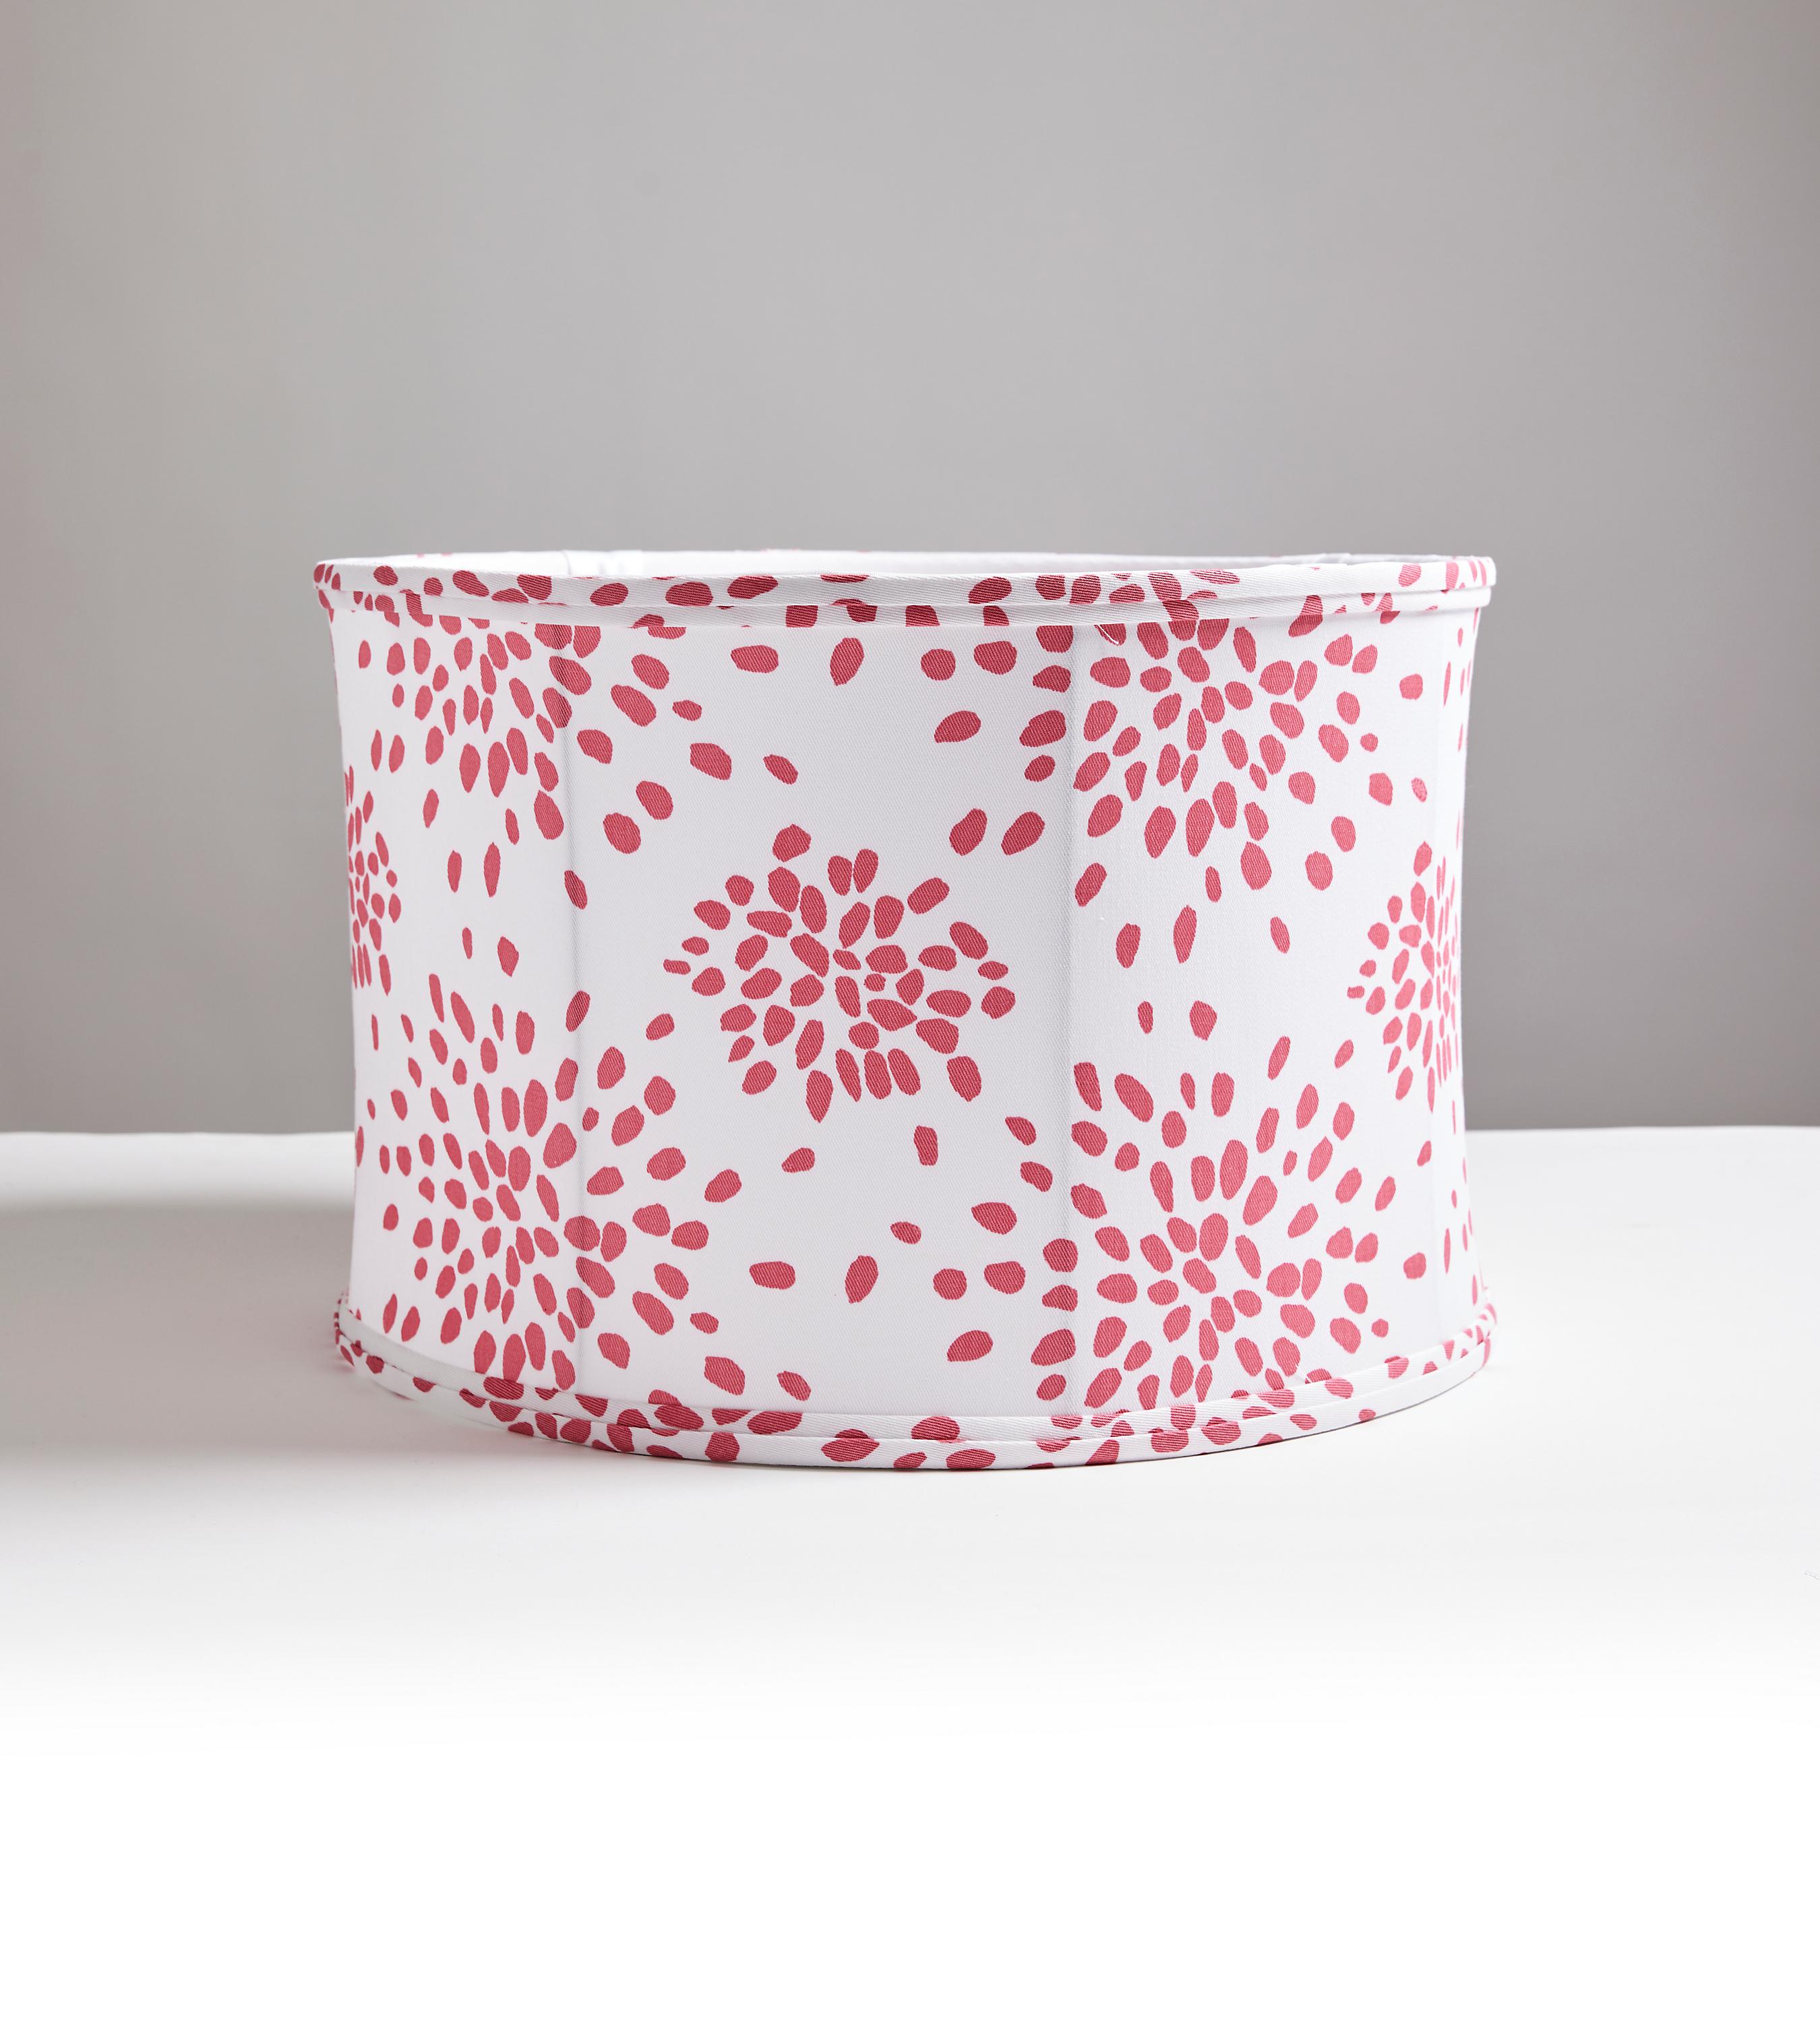 Fireworks, a well-loved pattern from Hinson, is available in printed fabric, wallcovering, luxurious pillows, and now, beautiful, handcrafted lampshades in drum and pleated styles. This energetic, allover pattern features graphic bursts of